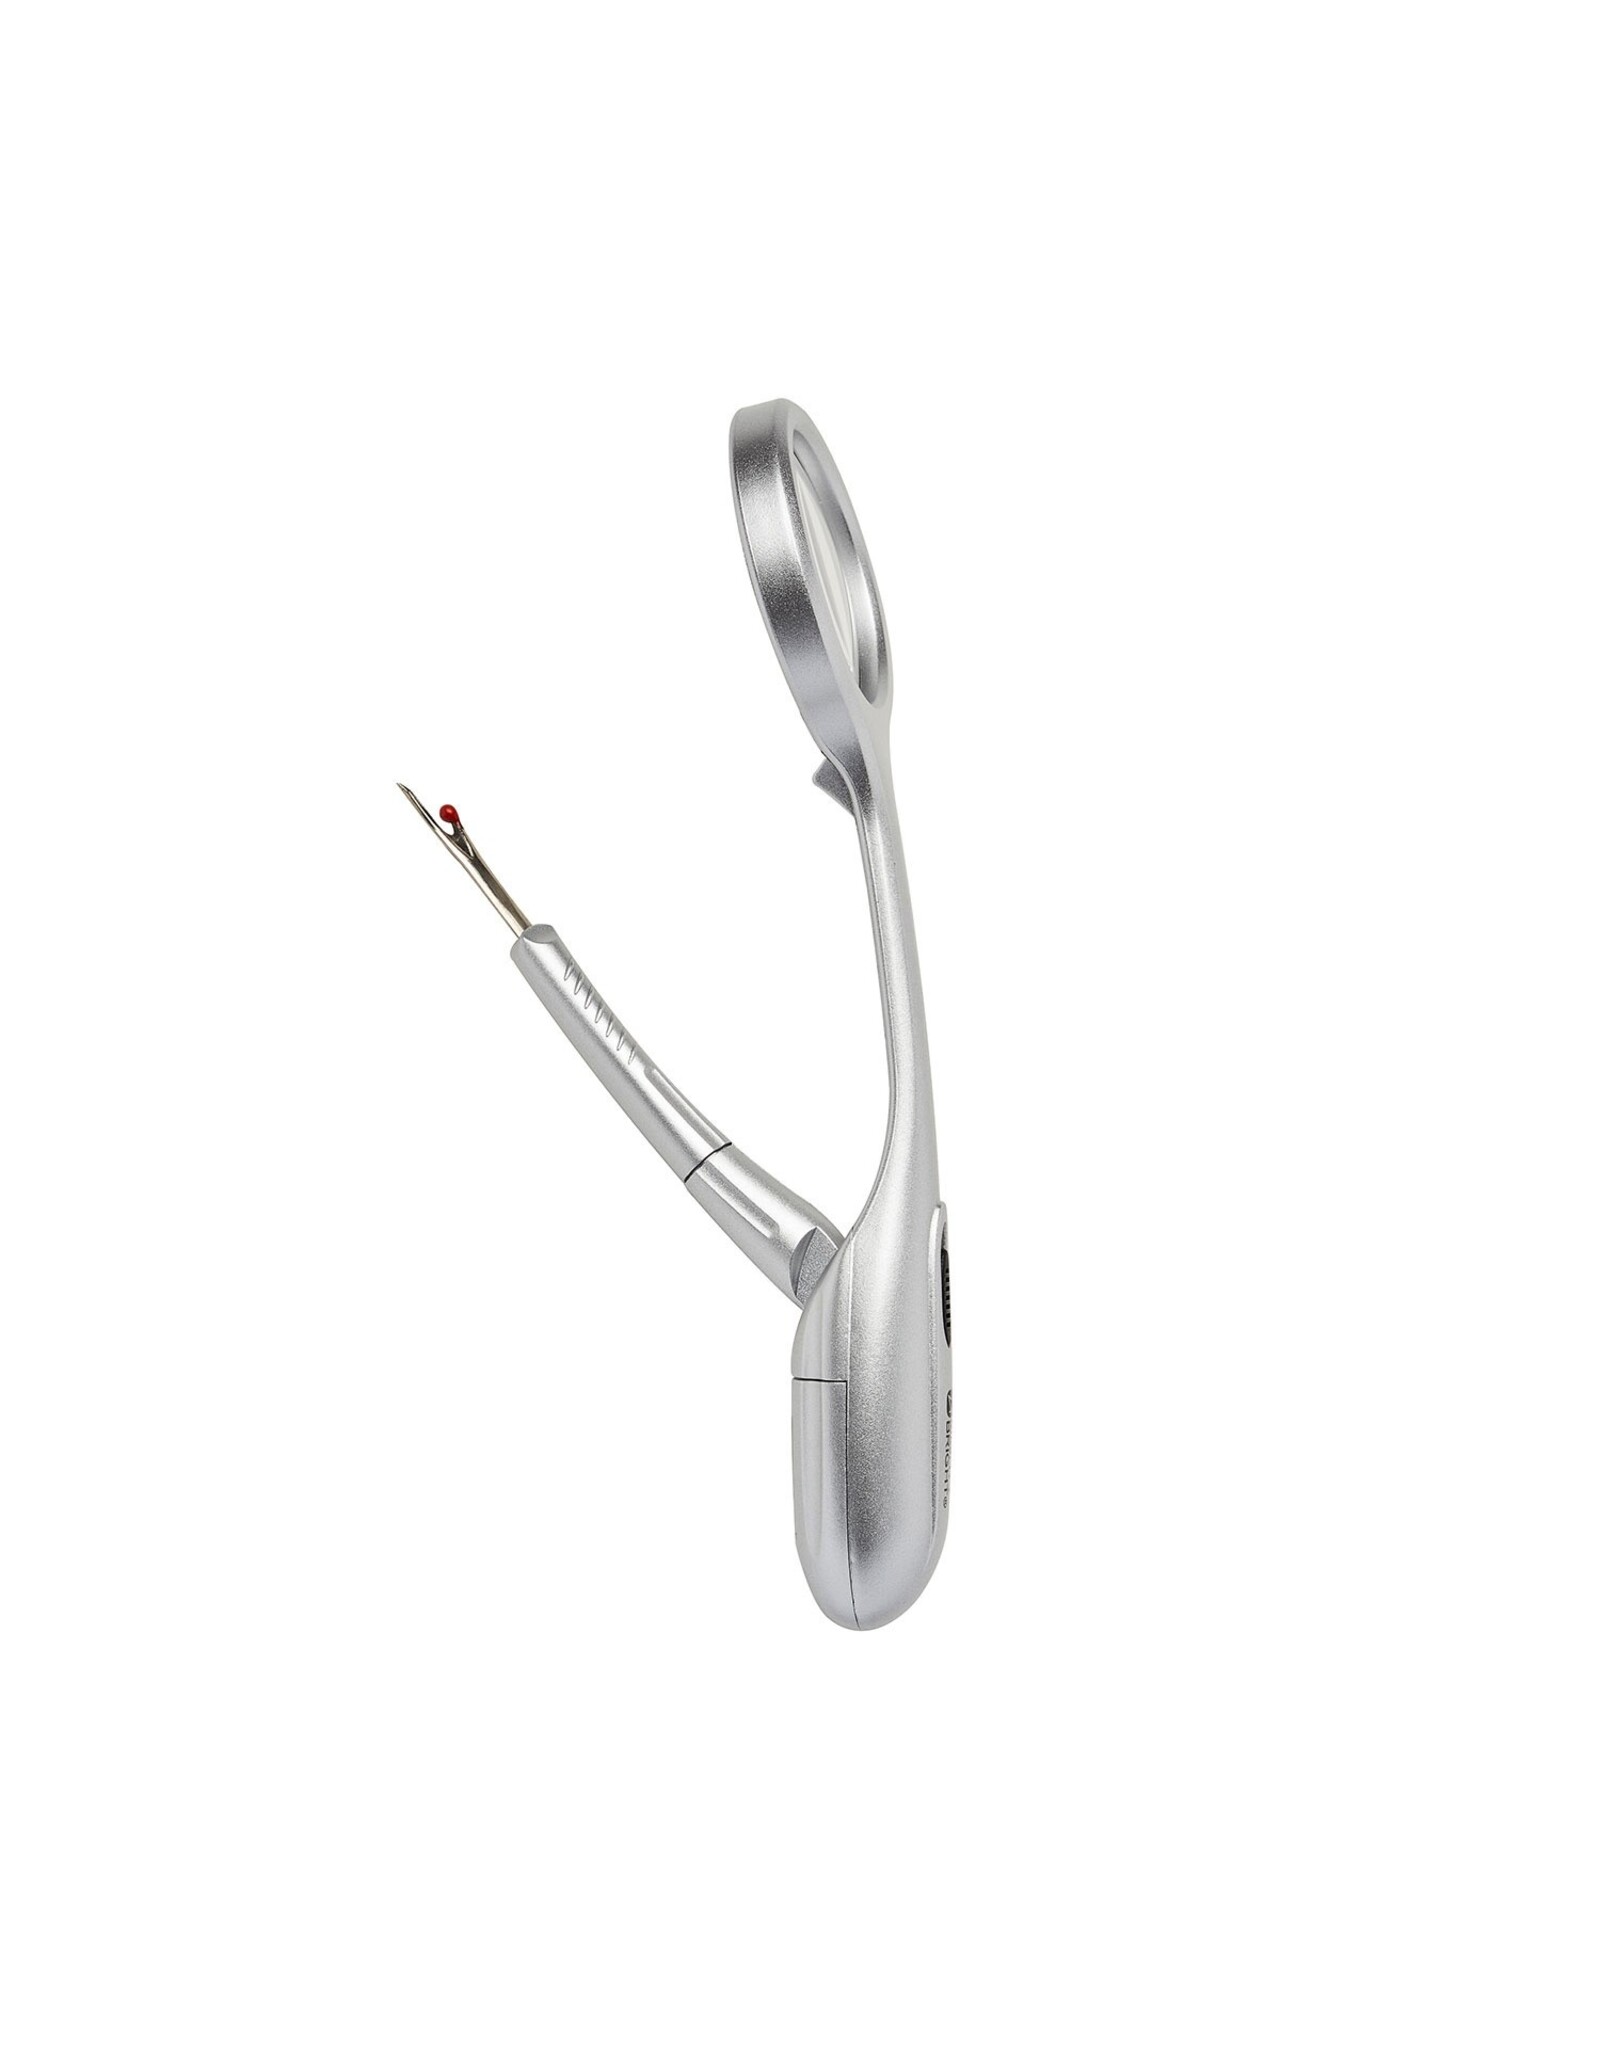 Mighty Bright Seam Ripper - LED Lighted with Magnifier